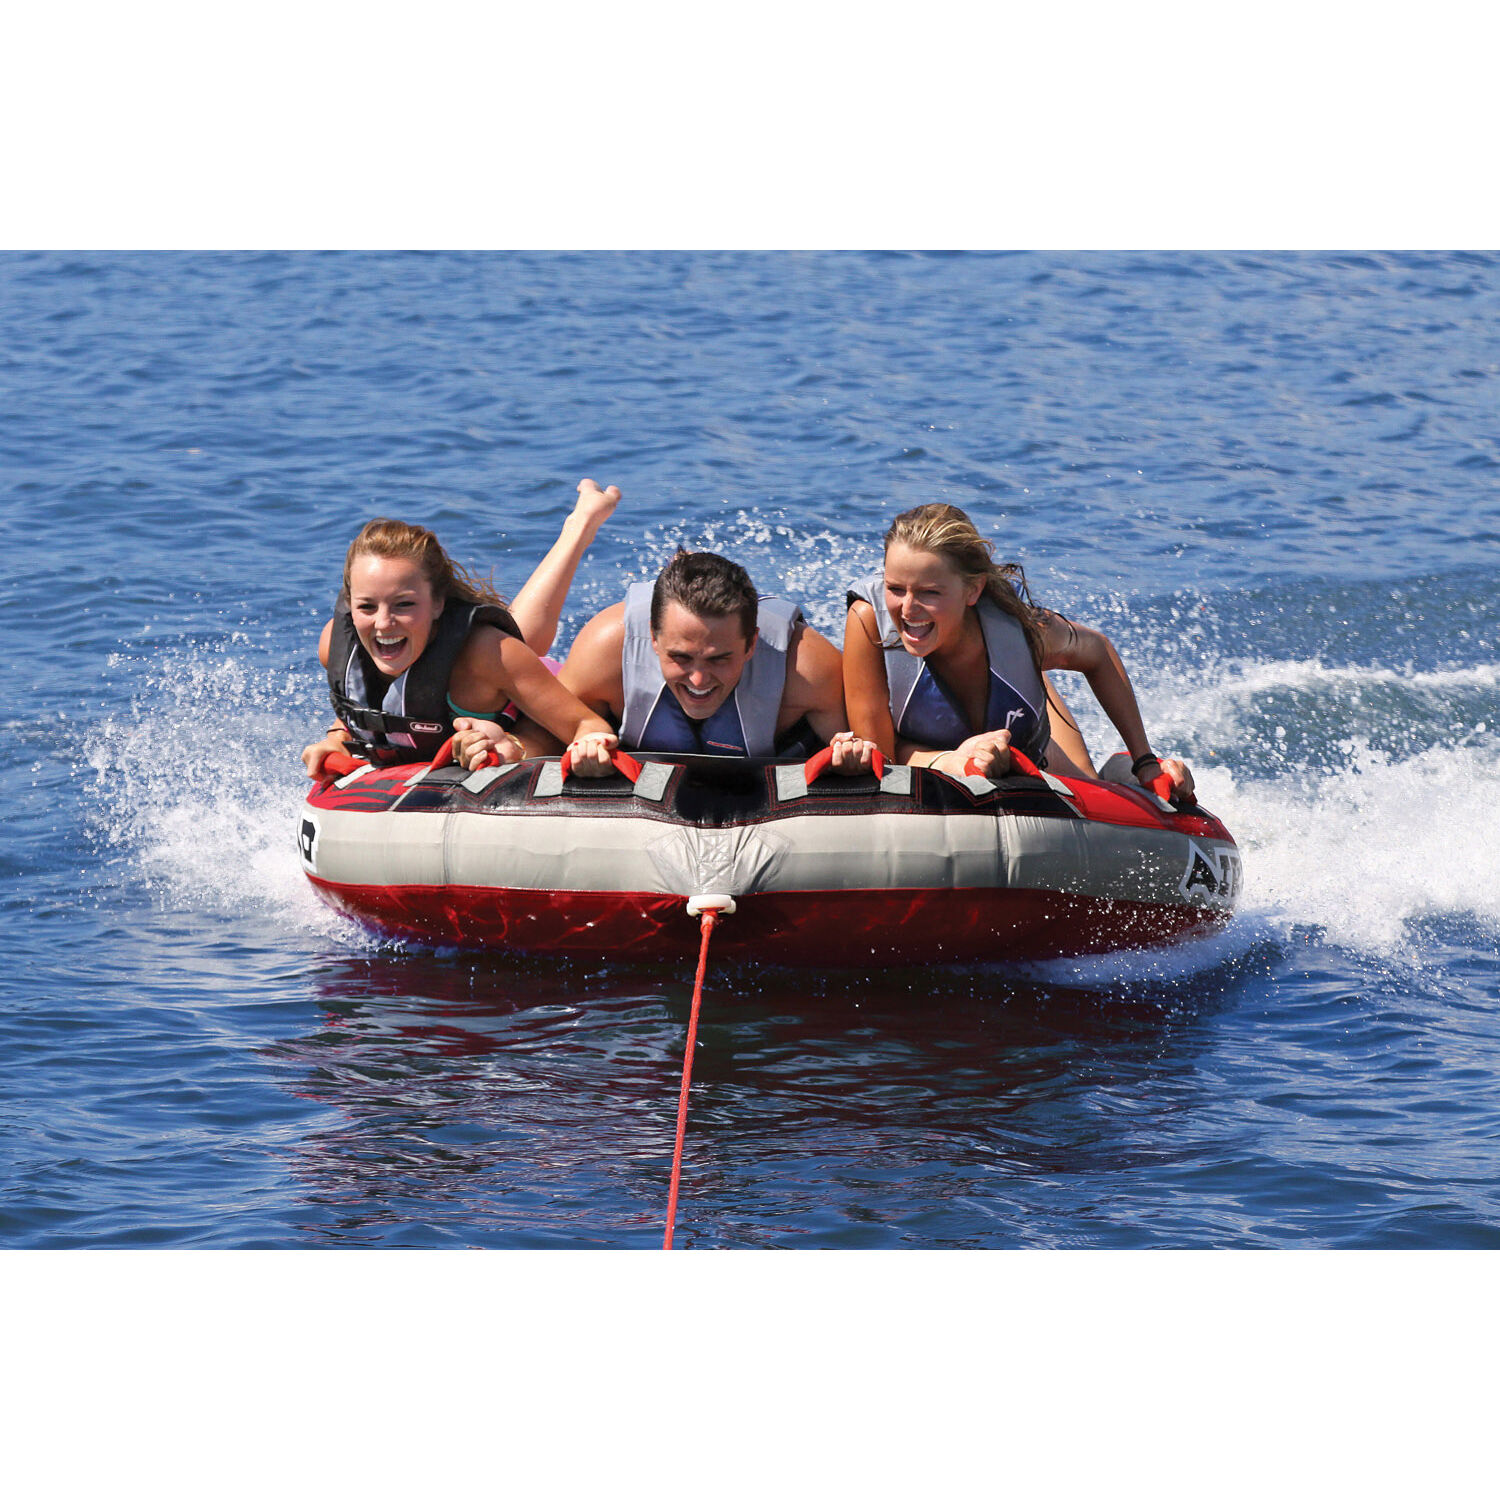 AIRHEAD G-Force 3 Performance Tube Towable Up to 3 People Ride AHGF-3